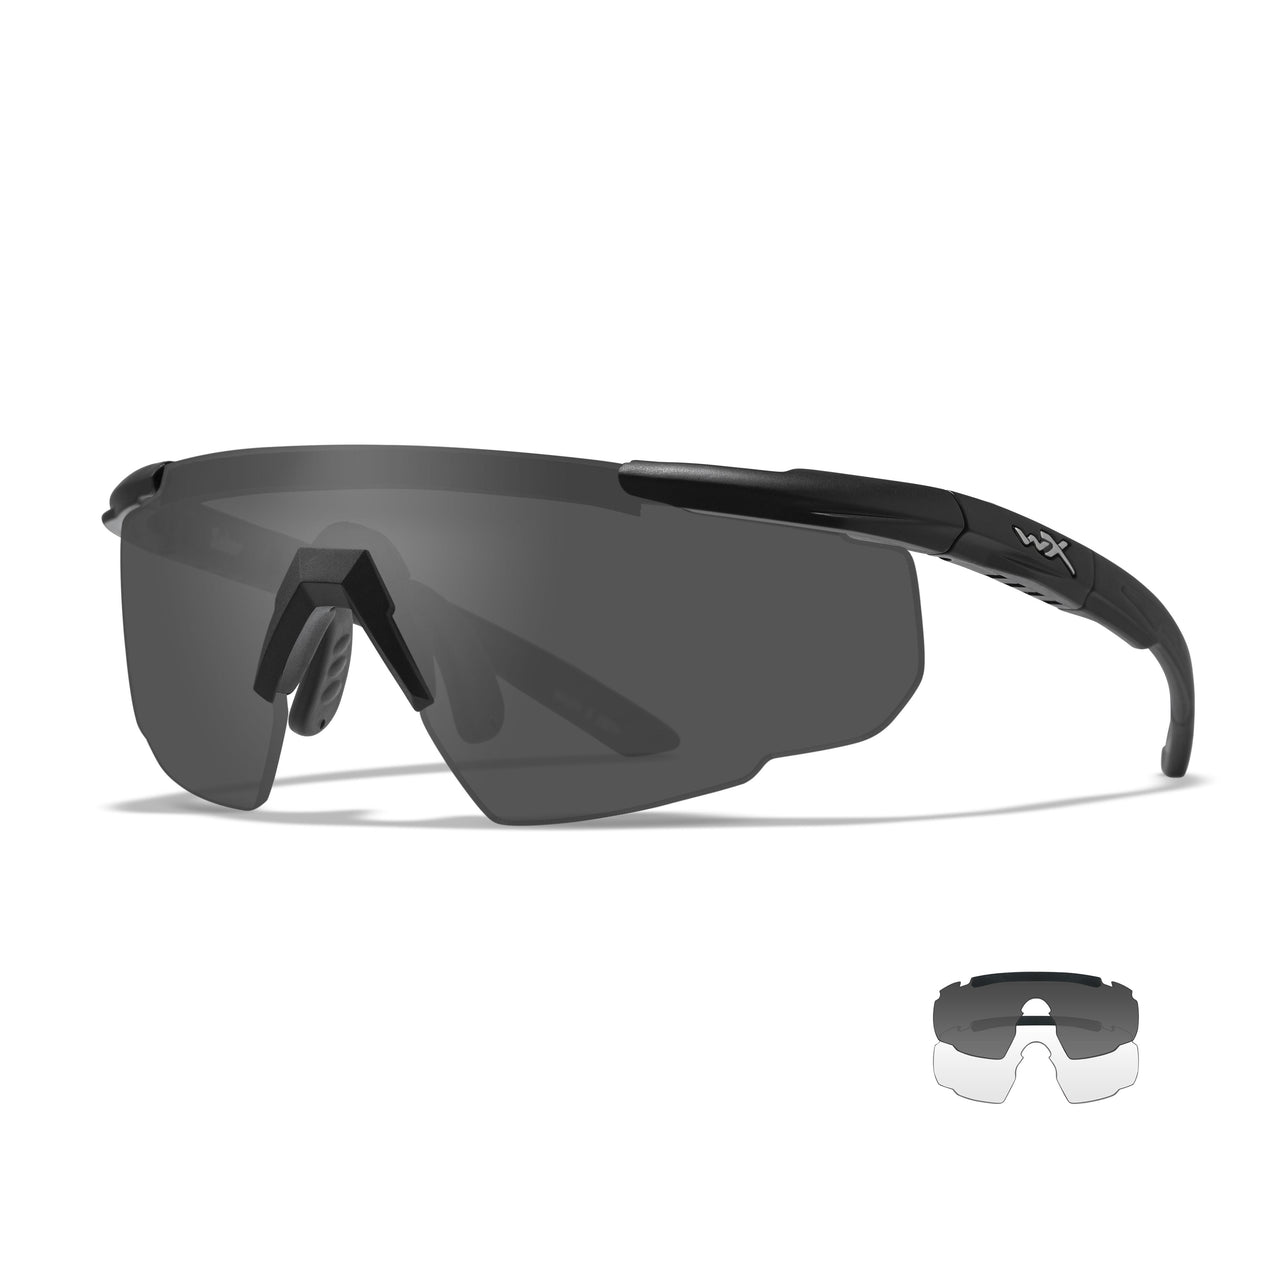 Wiley X Changeables Saber Sunglasses